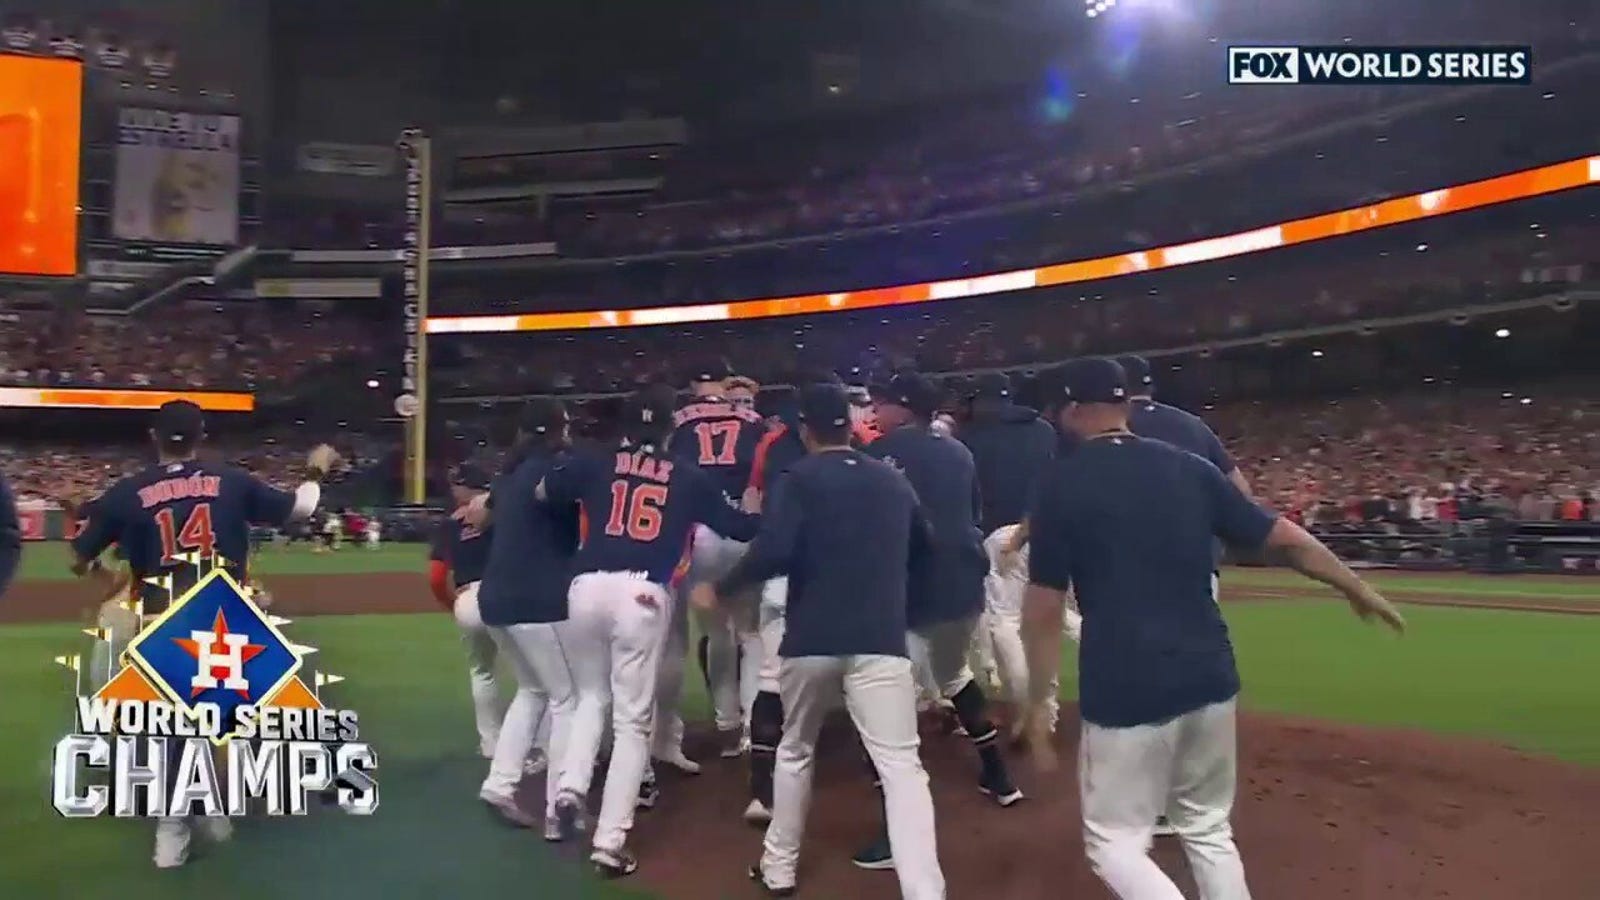 Astros defeat the Phillies to win the World Series